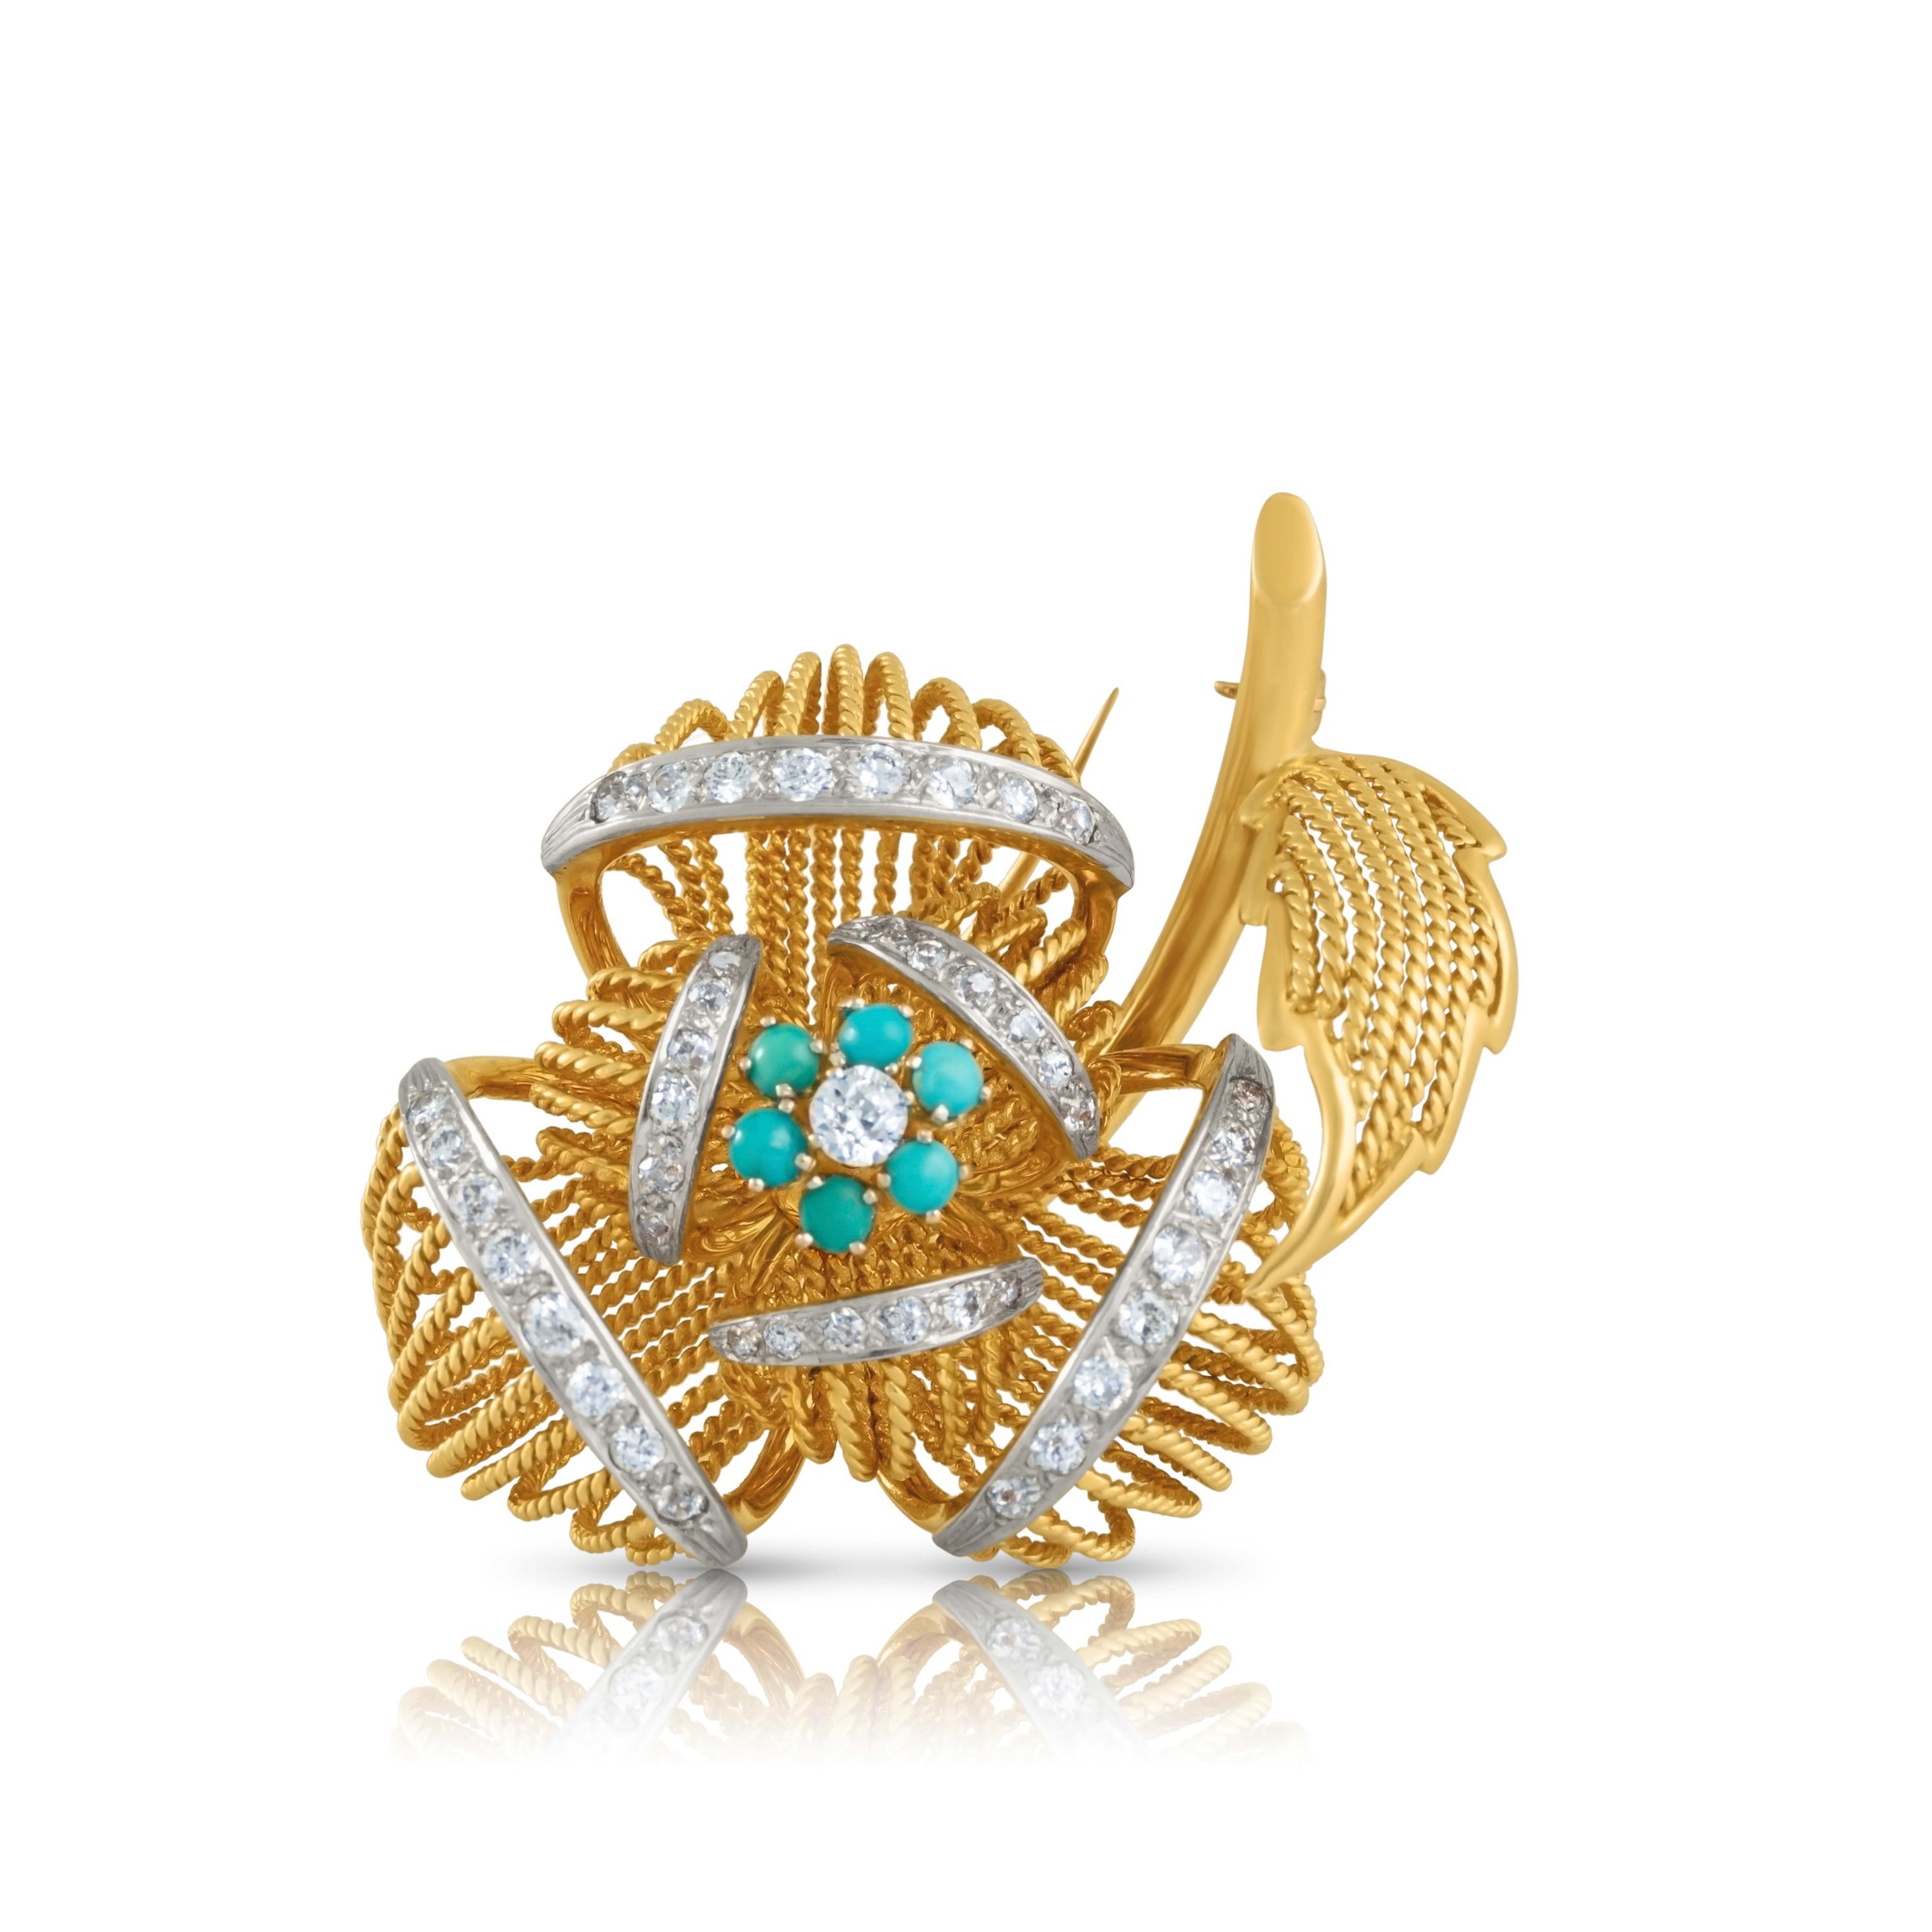 Brilliant Cut Gold Platinum Flower Brooch /Fur Clip With Turquoise And Diamonds  For Sale